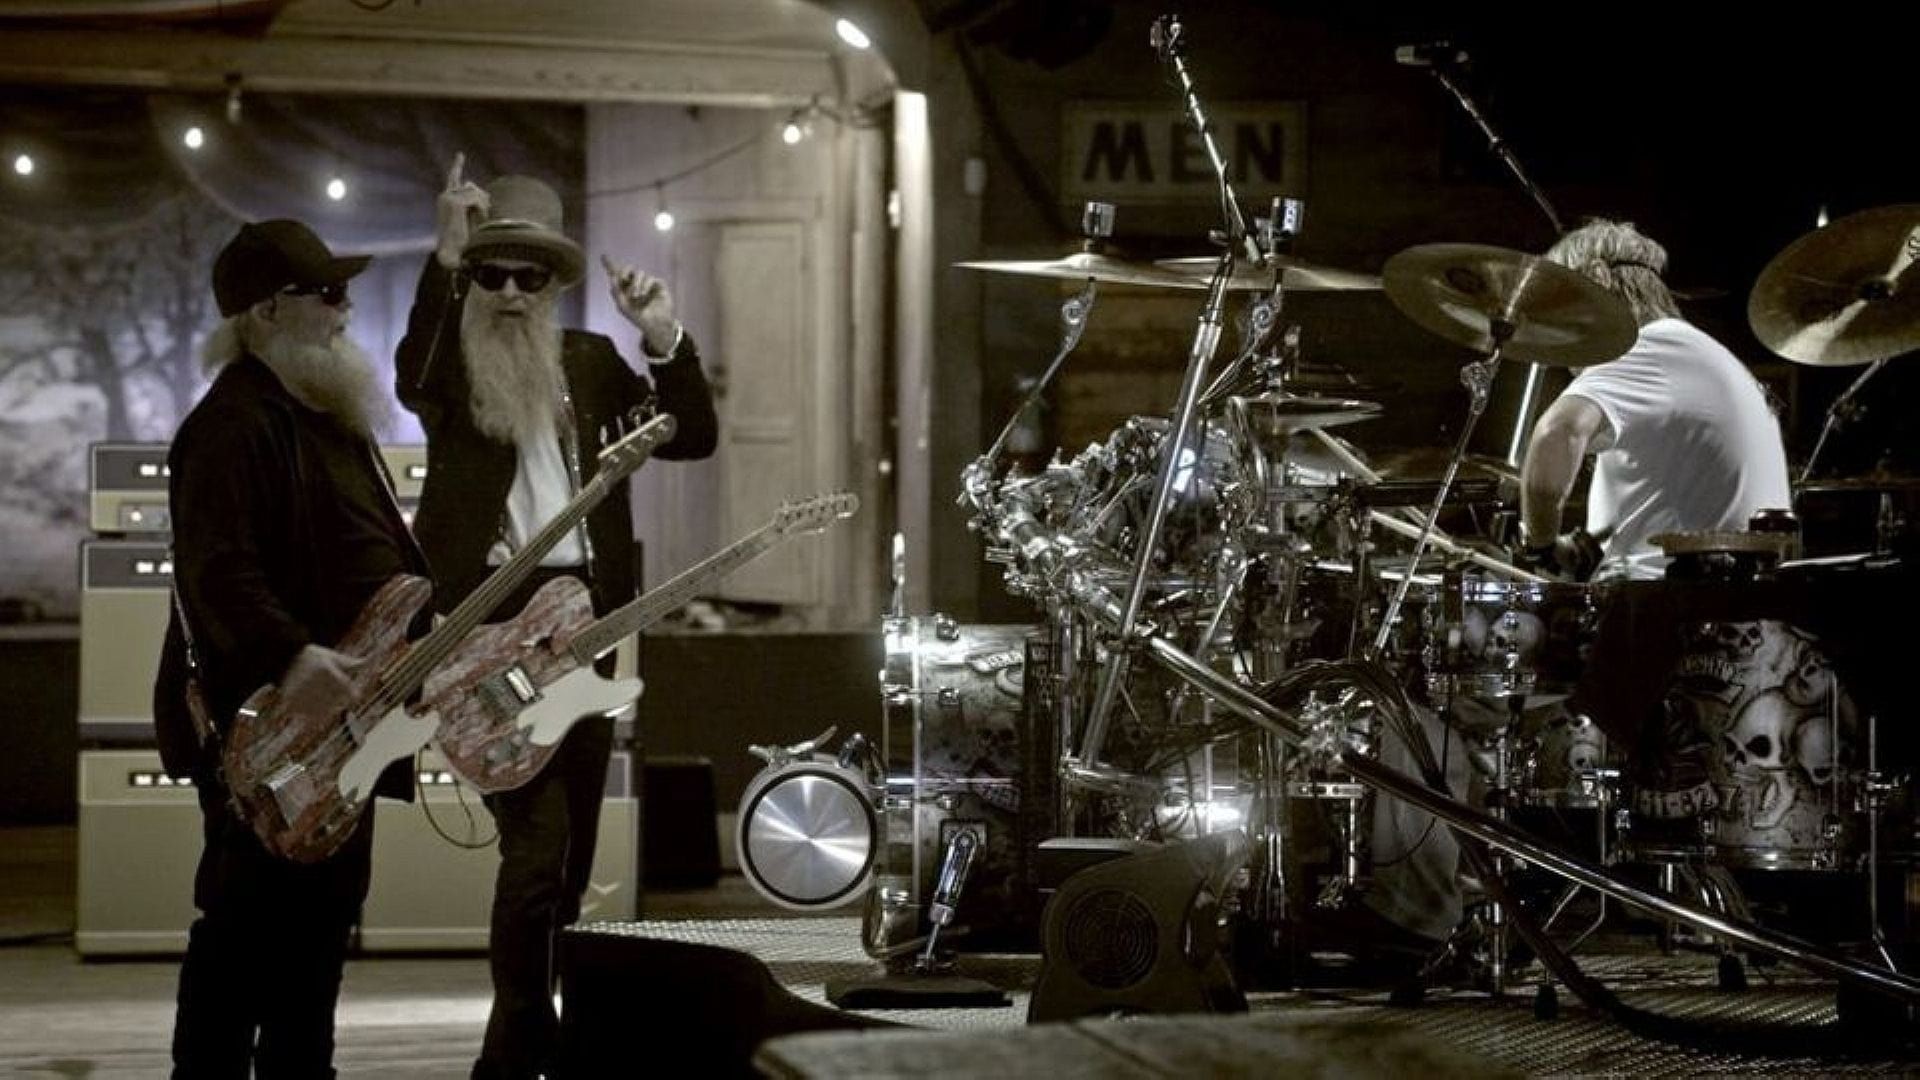 ZZ Top: That Little Ol' Band from Texas background